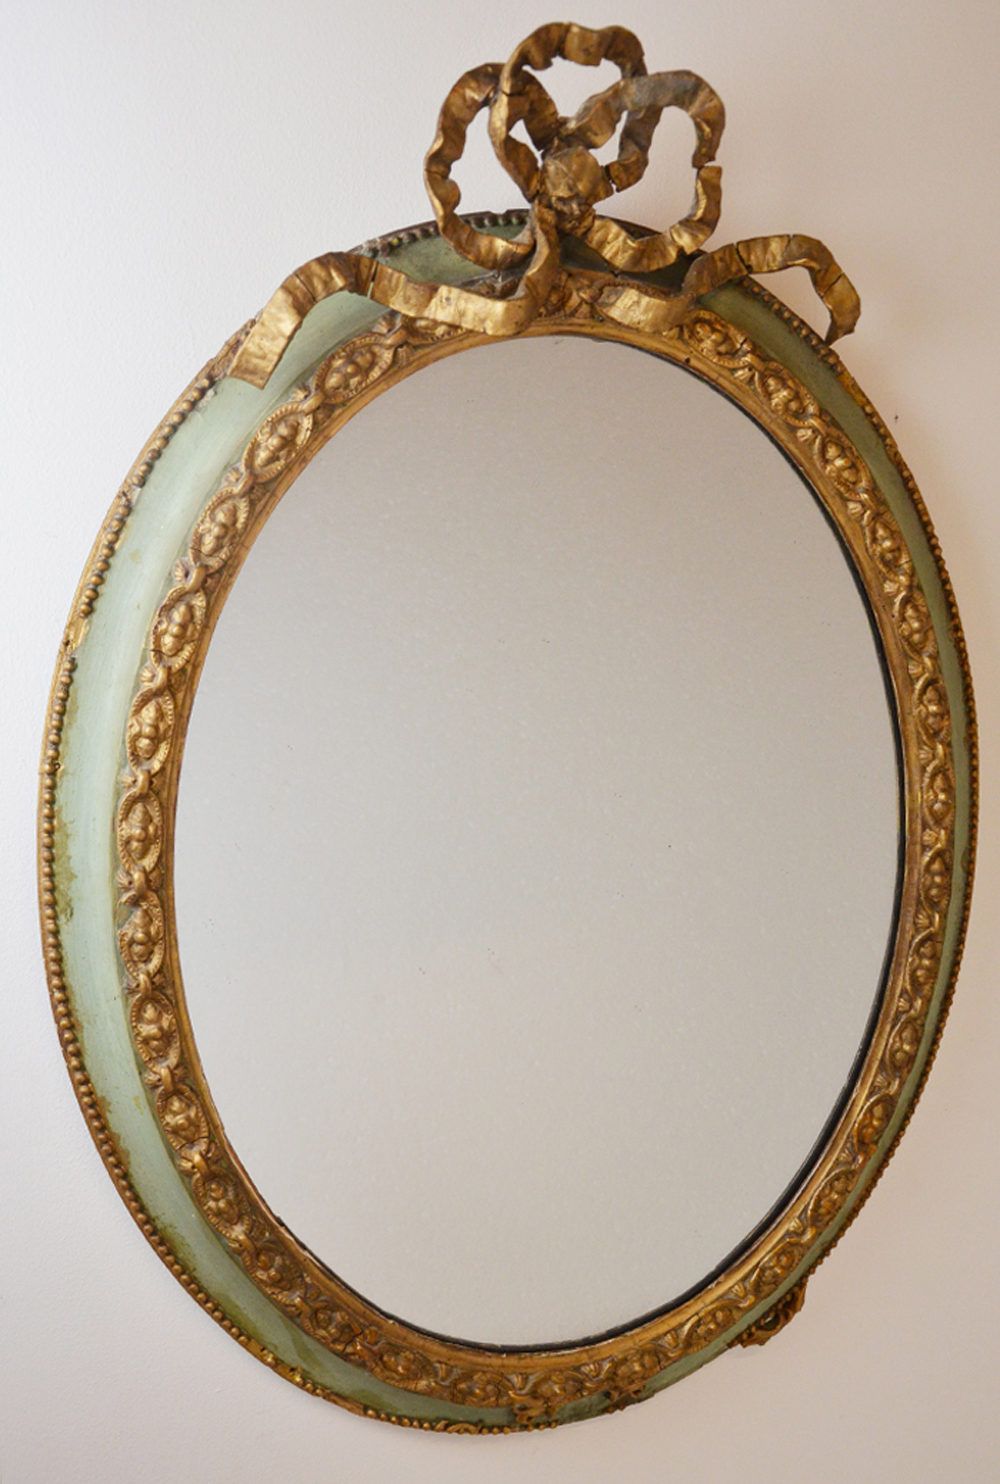 Antiques Atlas – Antique Wall Mirror Oval Looking Glass Gilt Gesso Intended For Wall Mirrors (View 12 of 15)